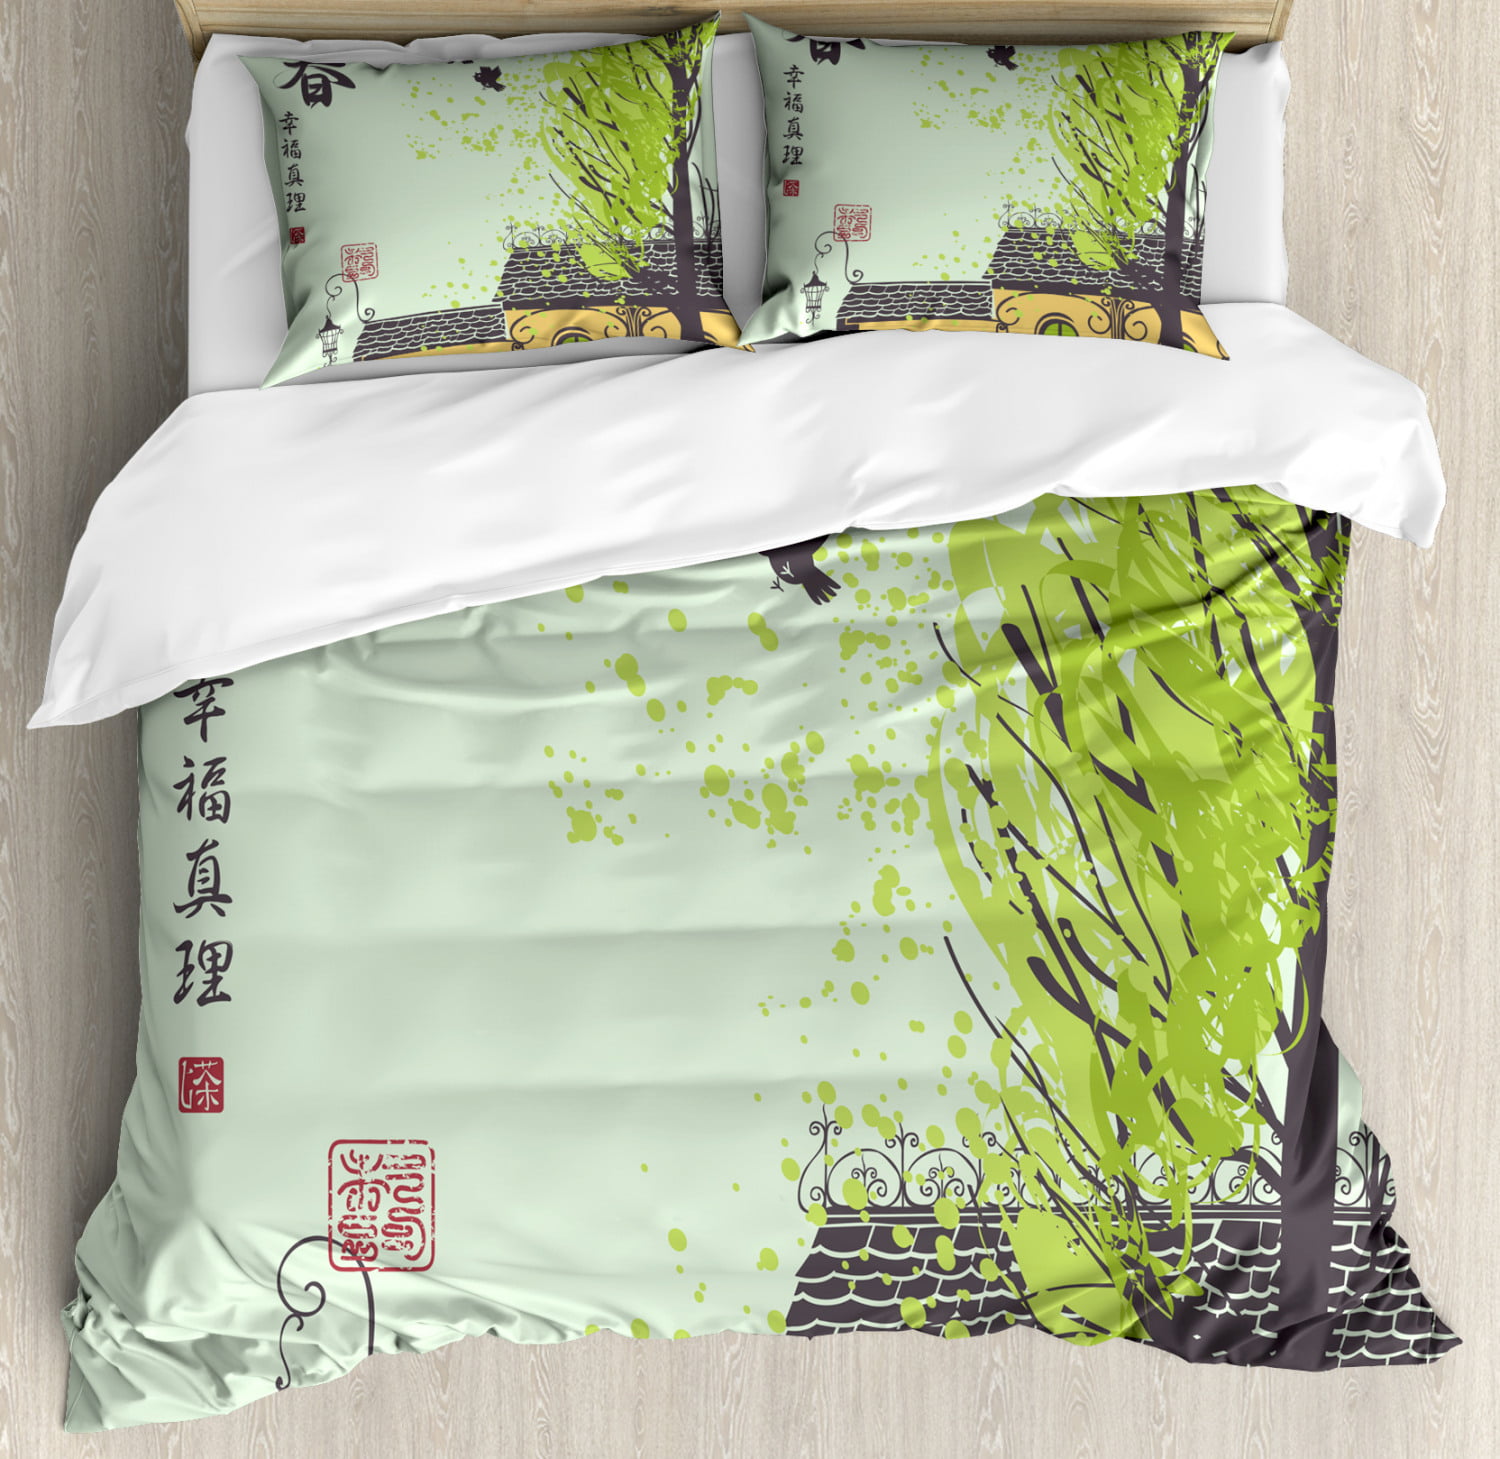 2 Pillowcases Asia 100% Natural Cotton Complete double bed sheet bedding 